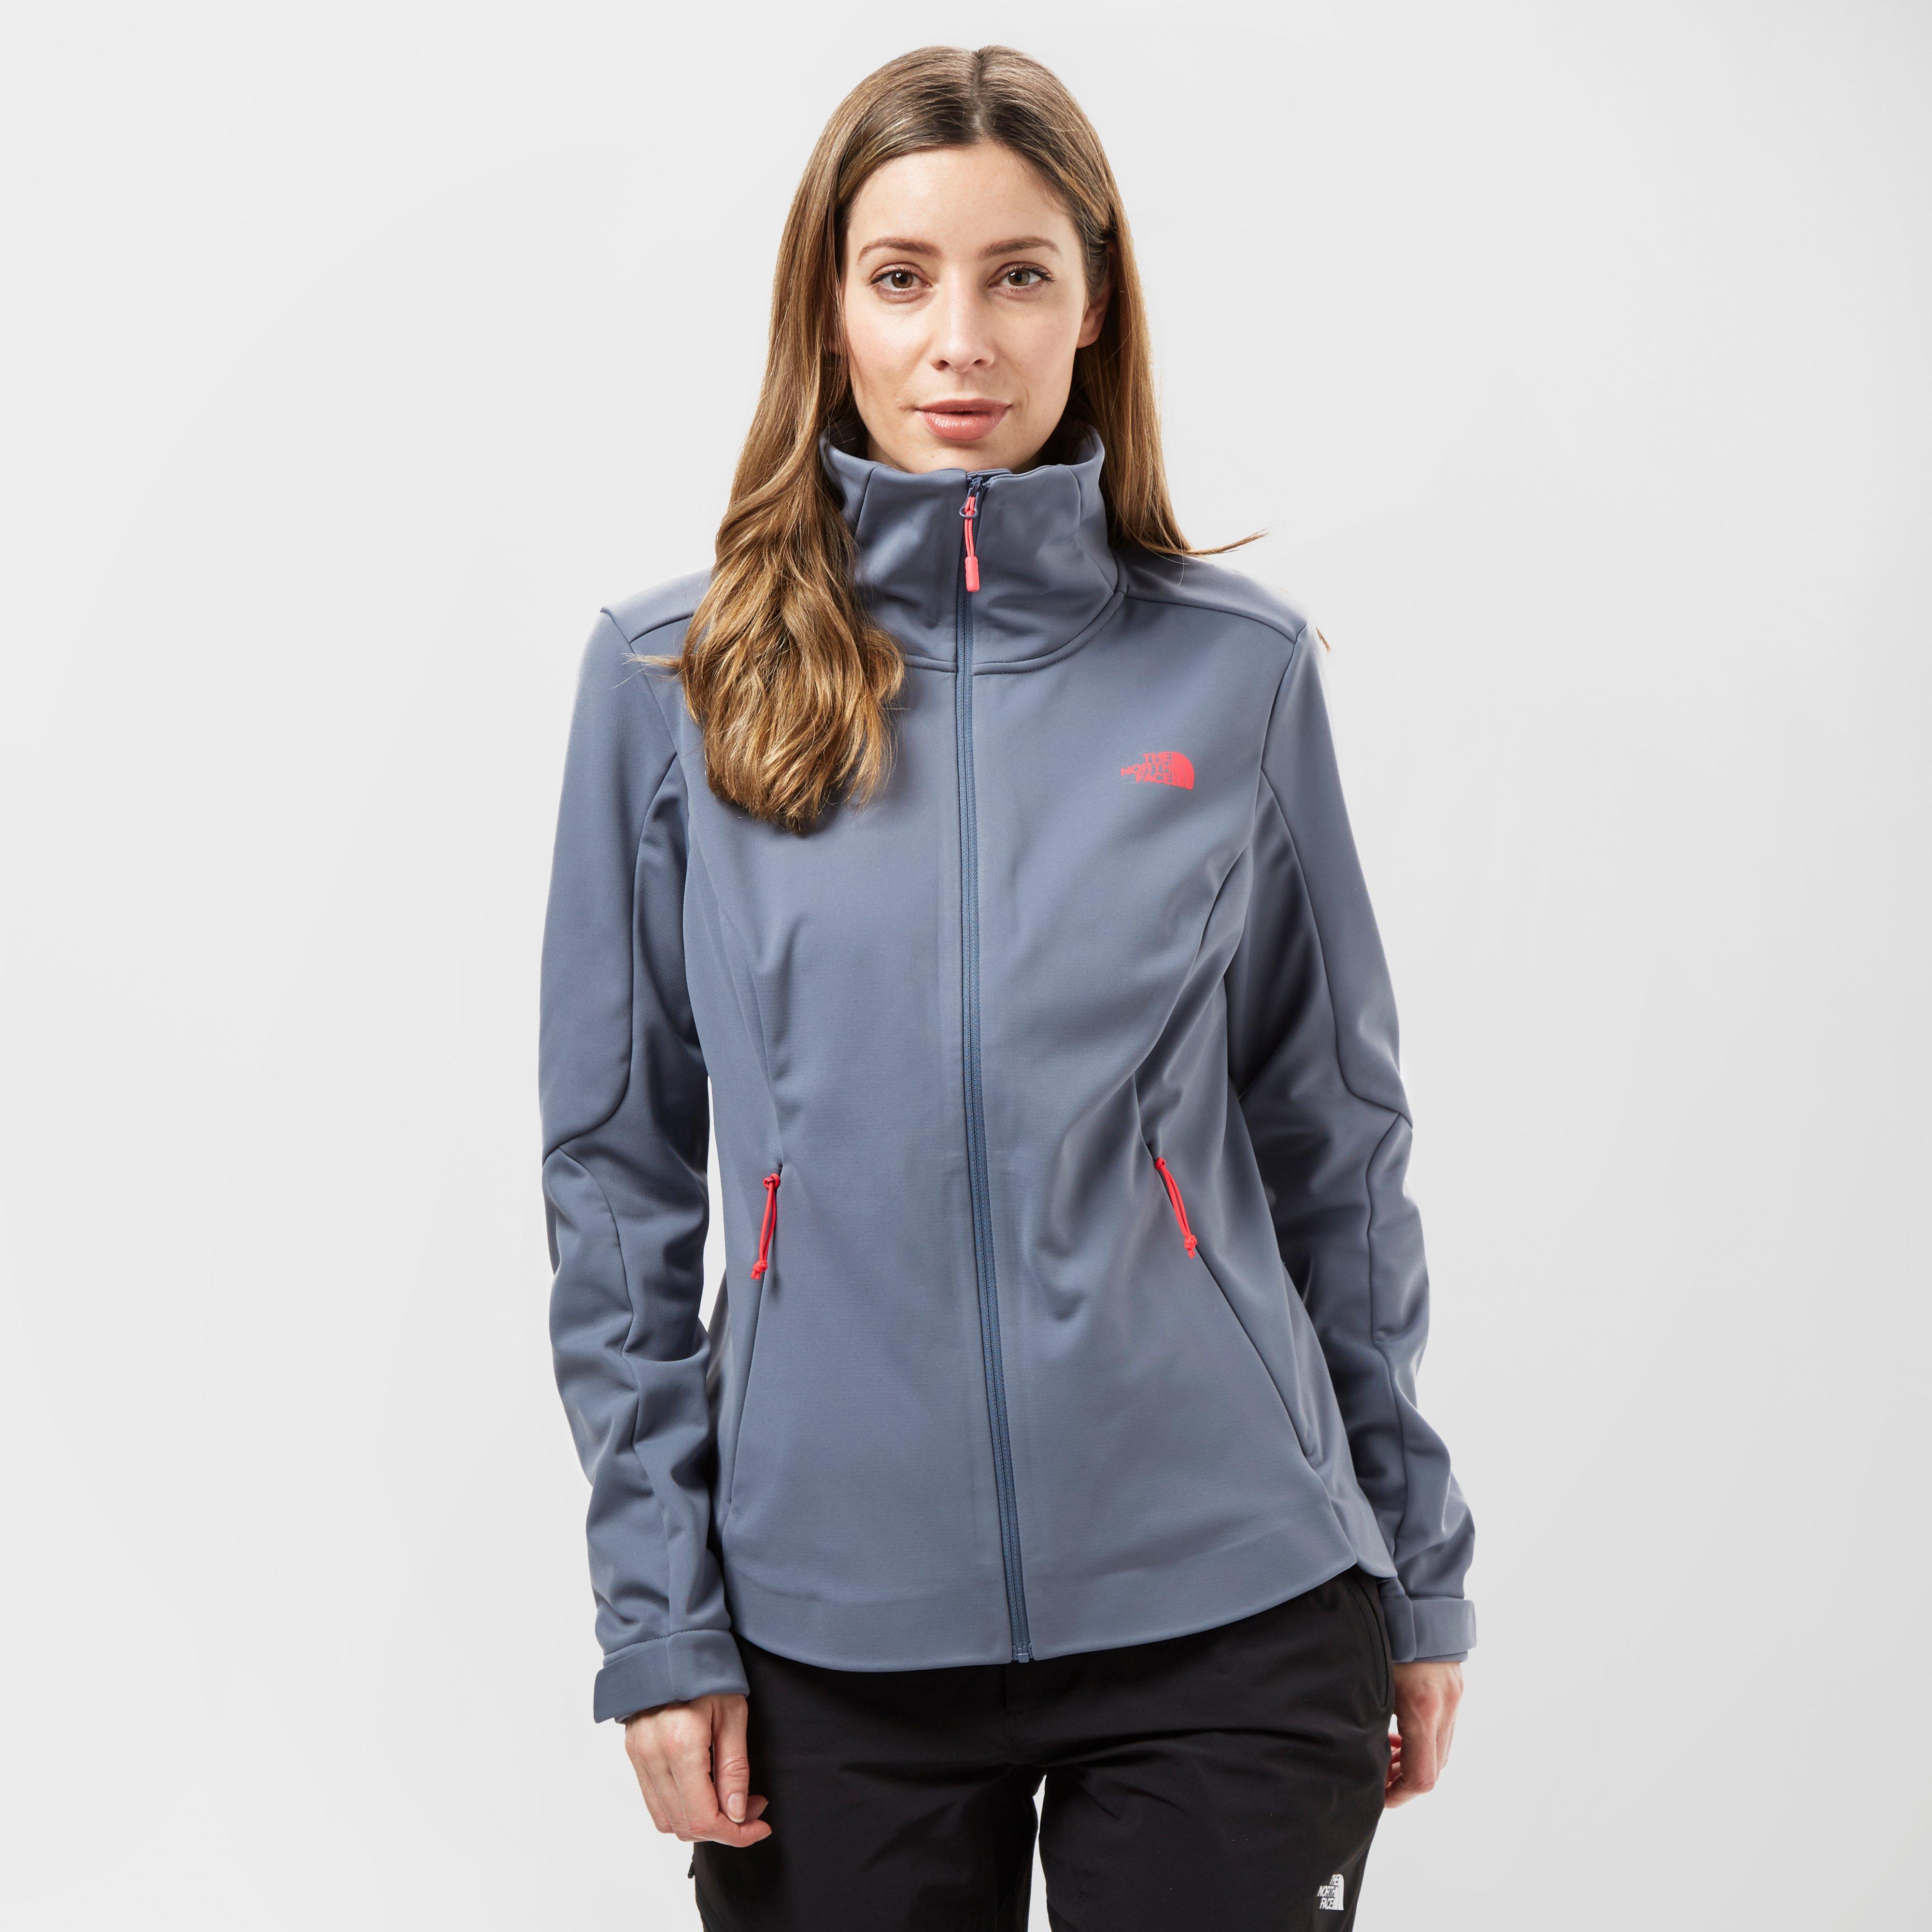 the north face inlux softshell